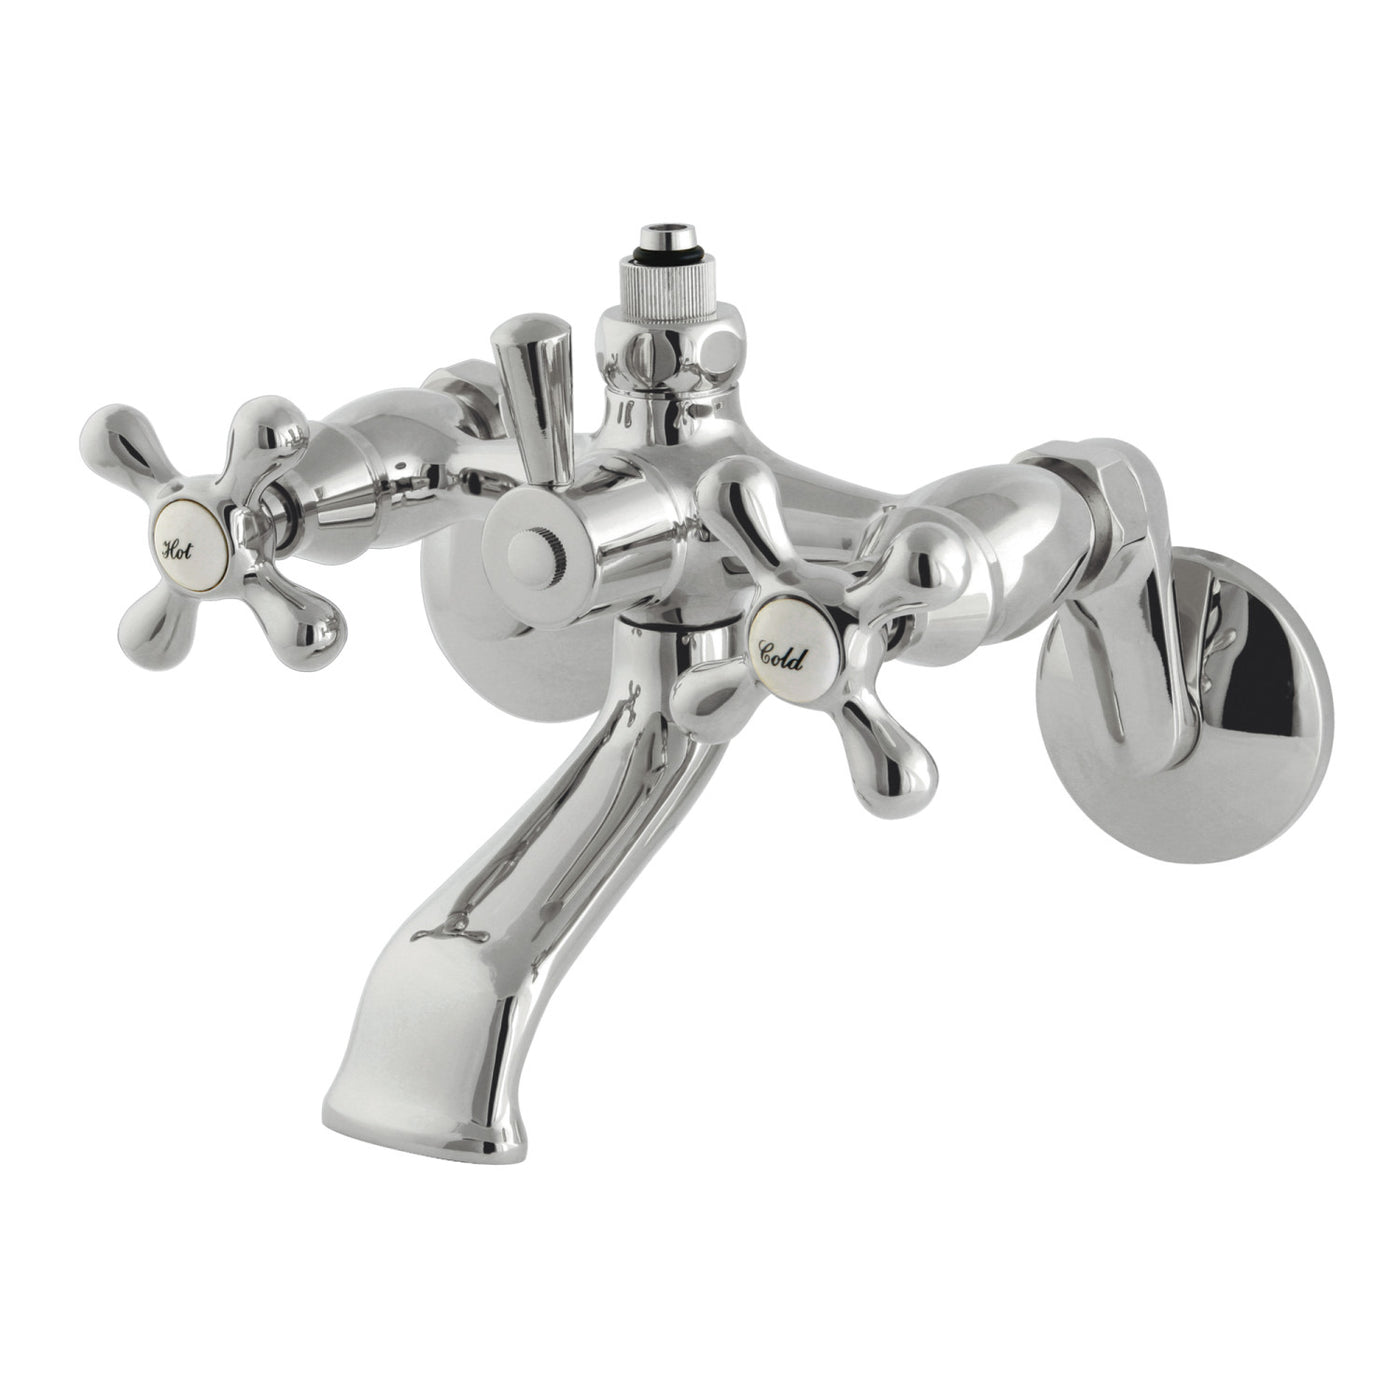 Elements of Design ED2661 Wall Mount Tub Faucet with Riser Adaptor, Polished Chrome